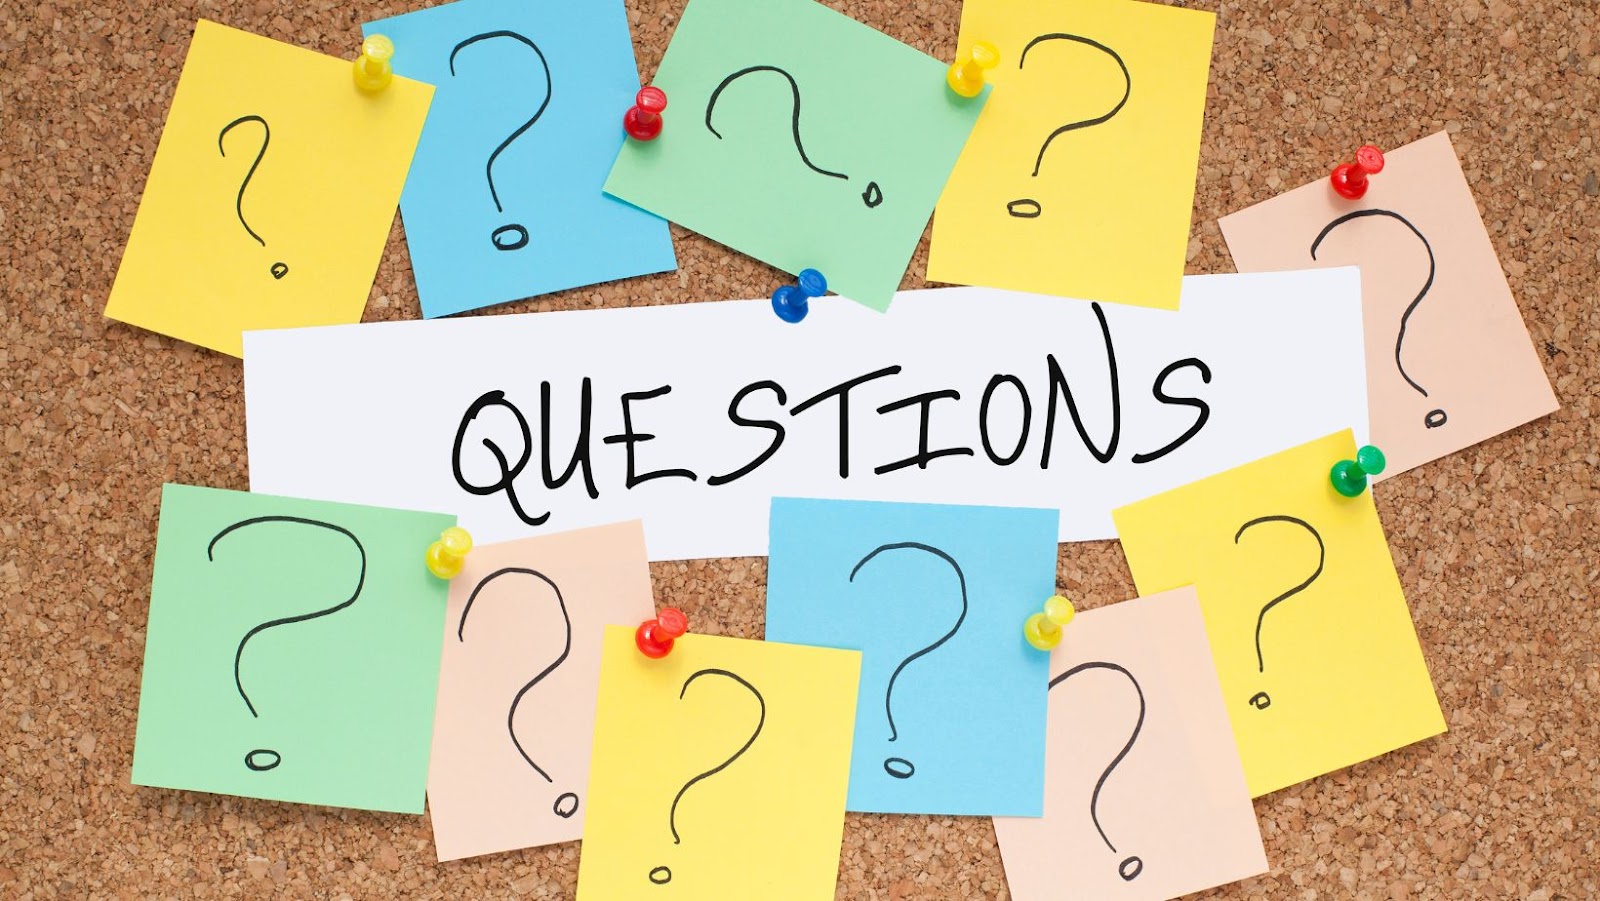 How Can Asking Buzzed Questions Help you?